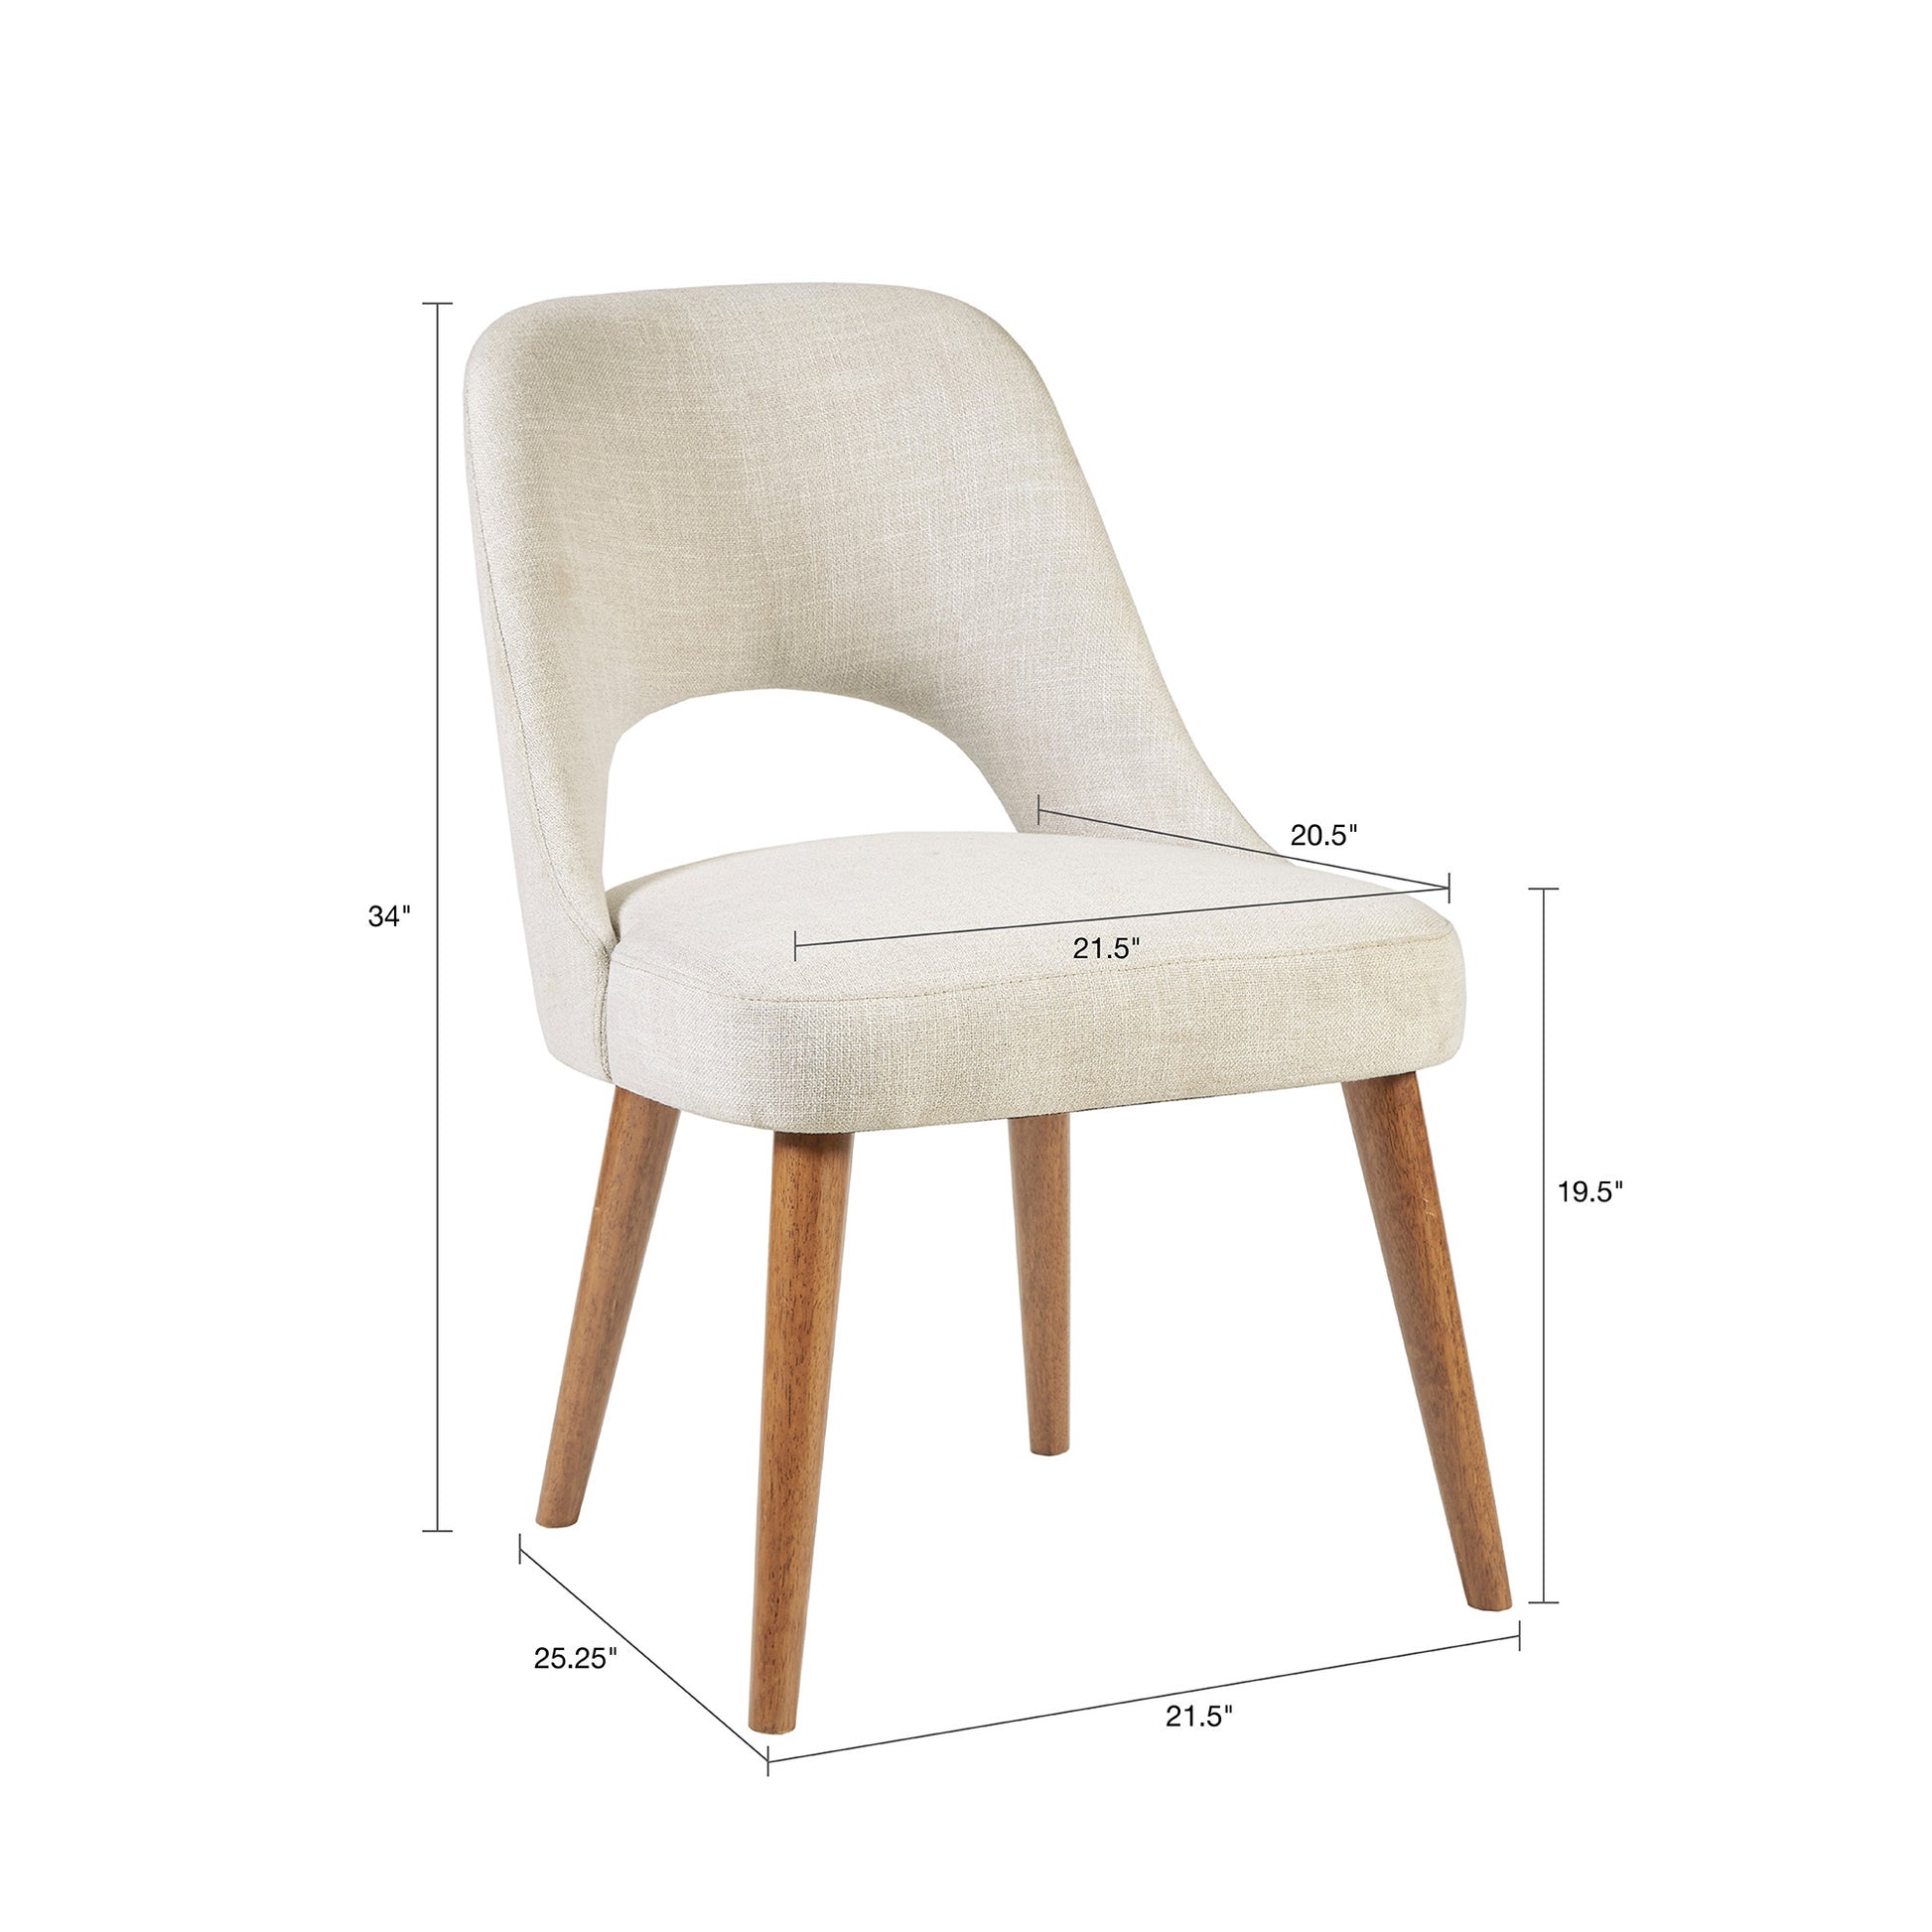 Dining Side Chair Set of 2 cream-polyester